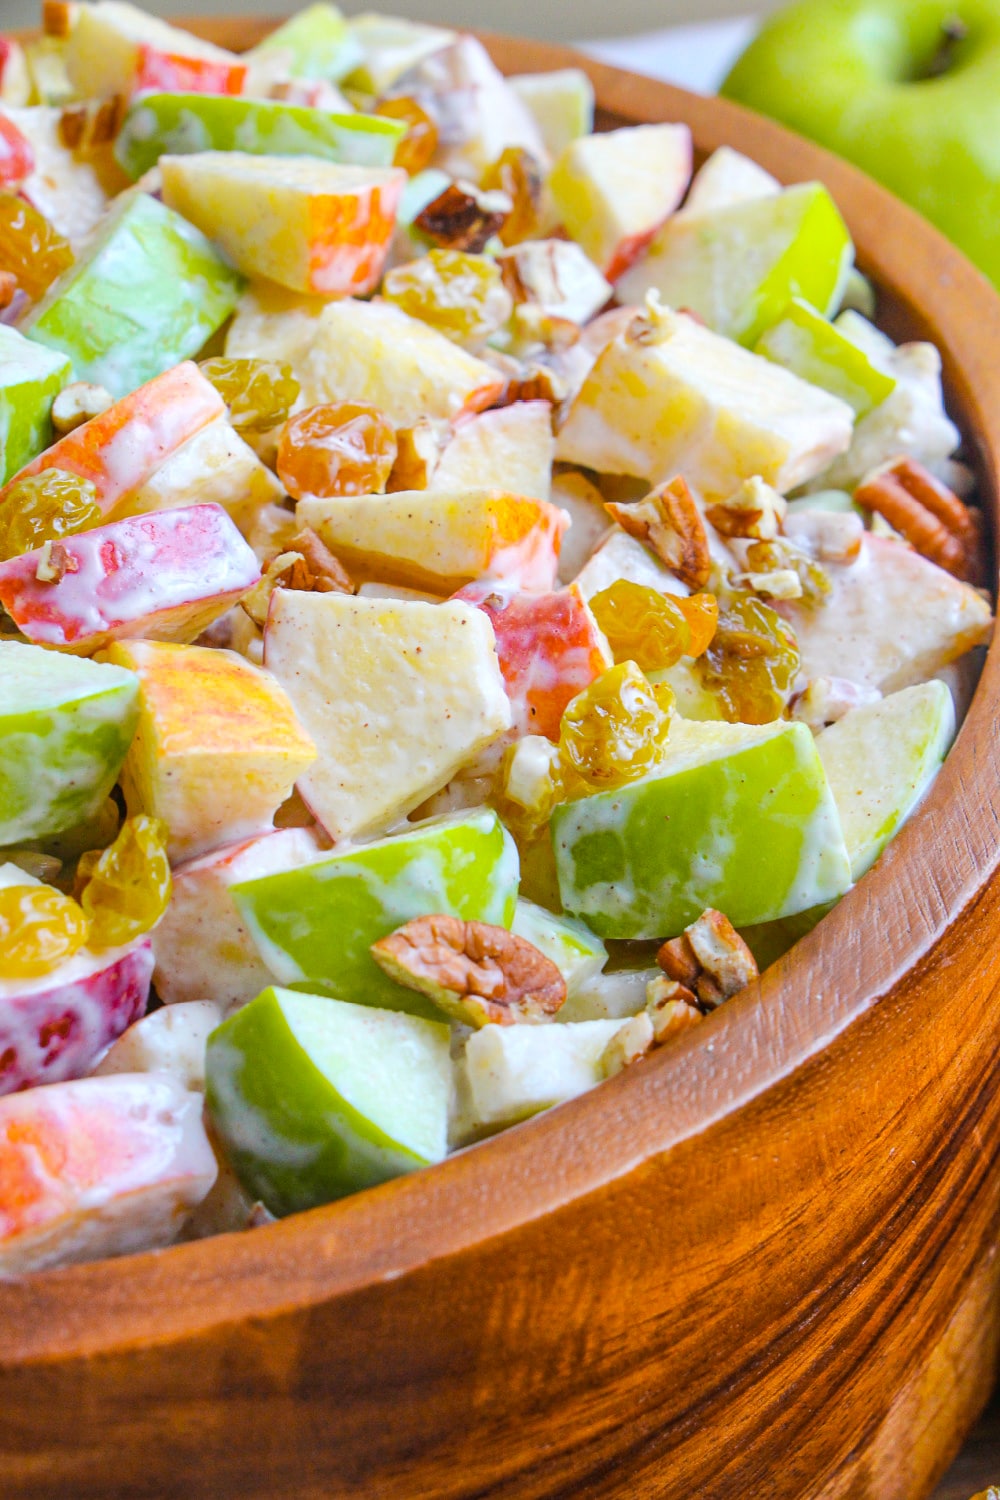 Chopped red and green apples tossed in cream cheese cinnamon dressing garnished with golden raisins and pecans in a larger wood serving bowl.